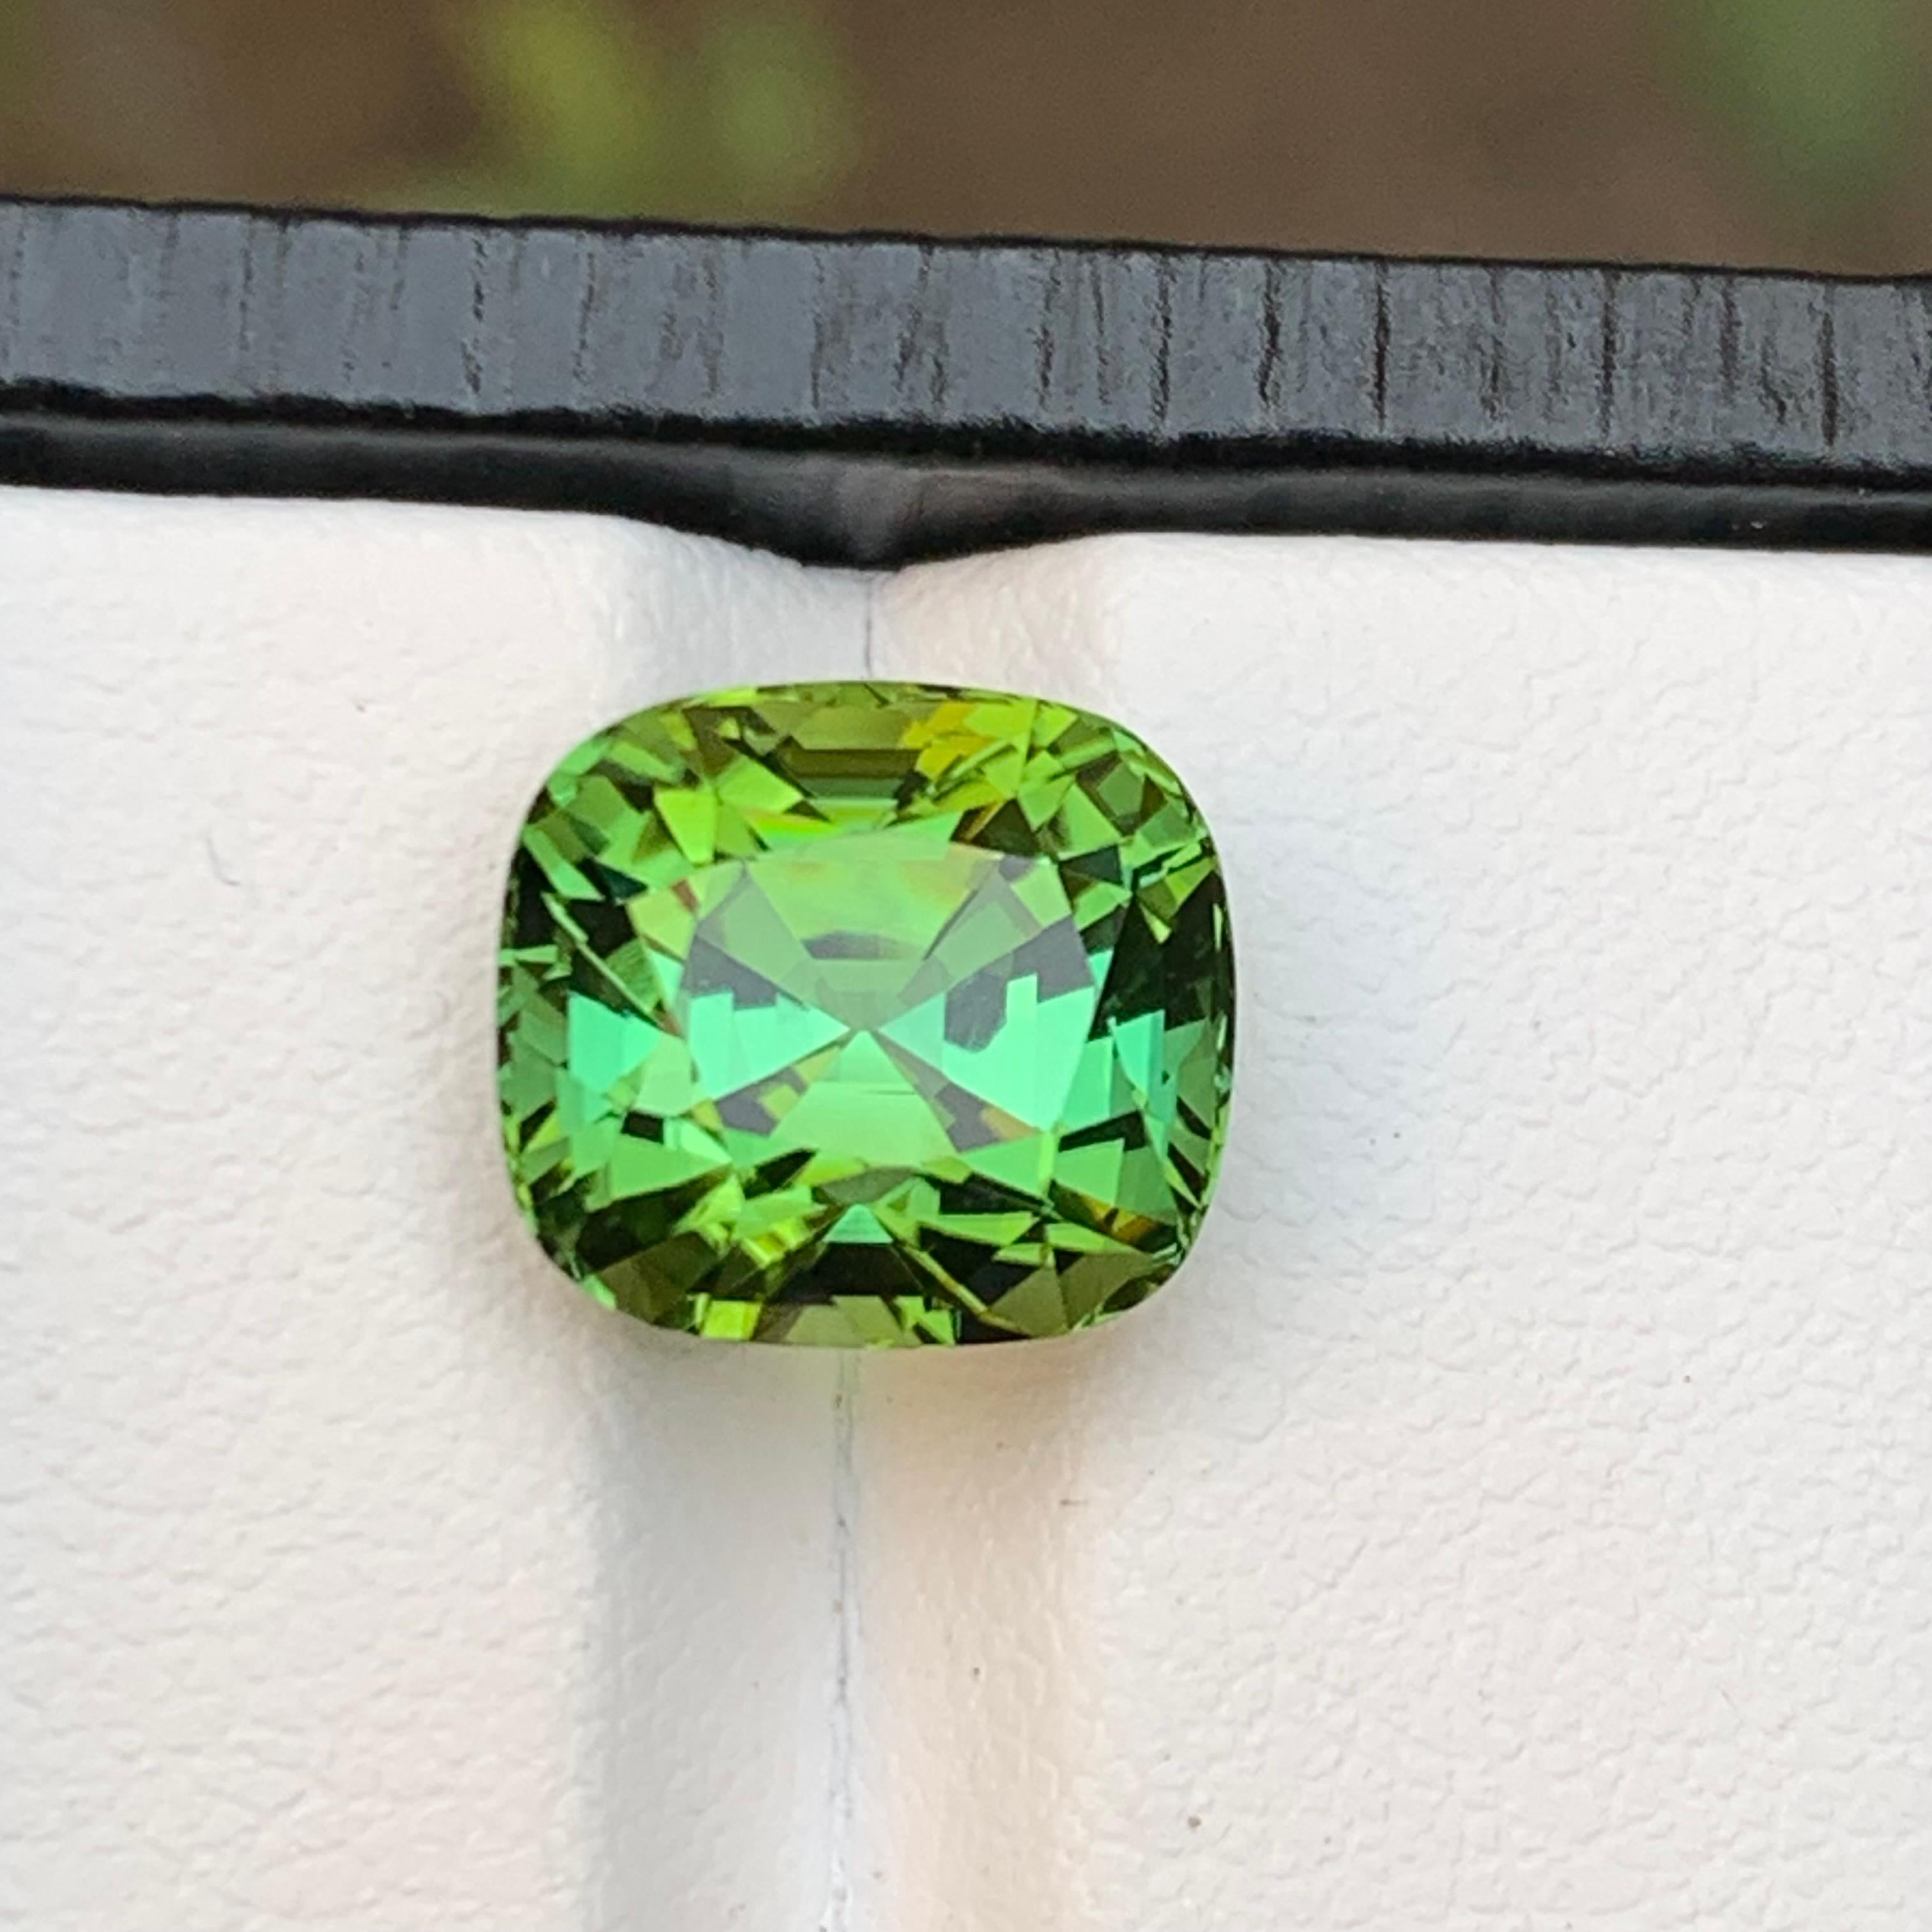 Captivating Mint Green Tourmaline Loose Gemstone - Ethically Sourced from Afghanistan

Gemstone Type: Tourmaline
Weight: 5.80 Carats
Dimensions: 9.44 x 10.36 x 8.63 mm
Color: Mint Green
Clarity: Eye Clean
Treatment: Untreated 
Origin: